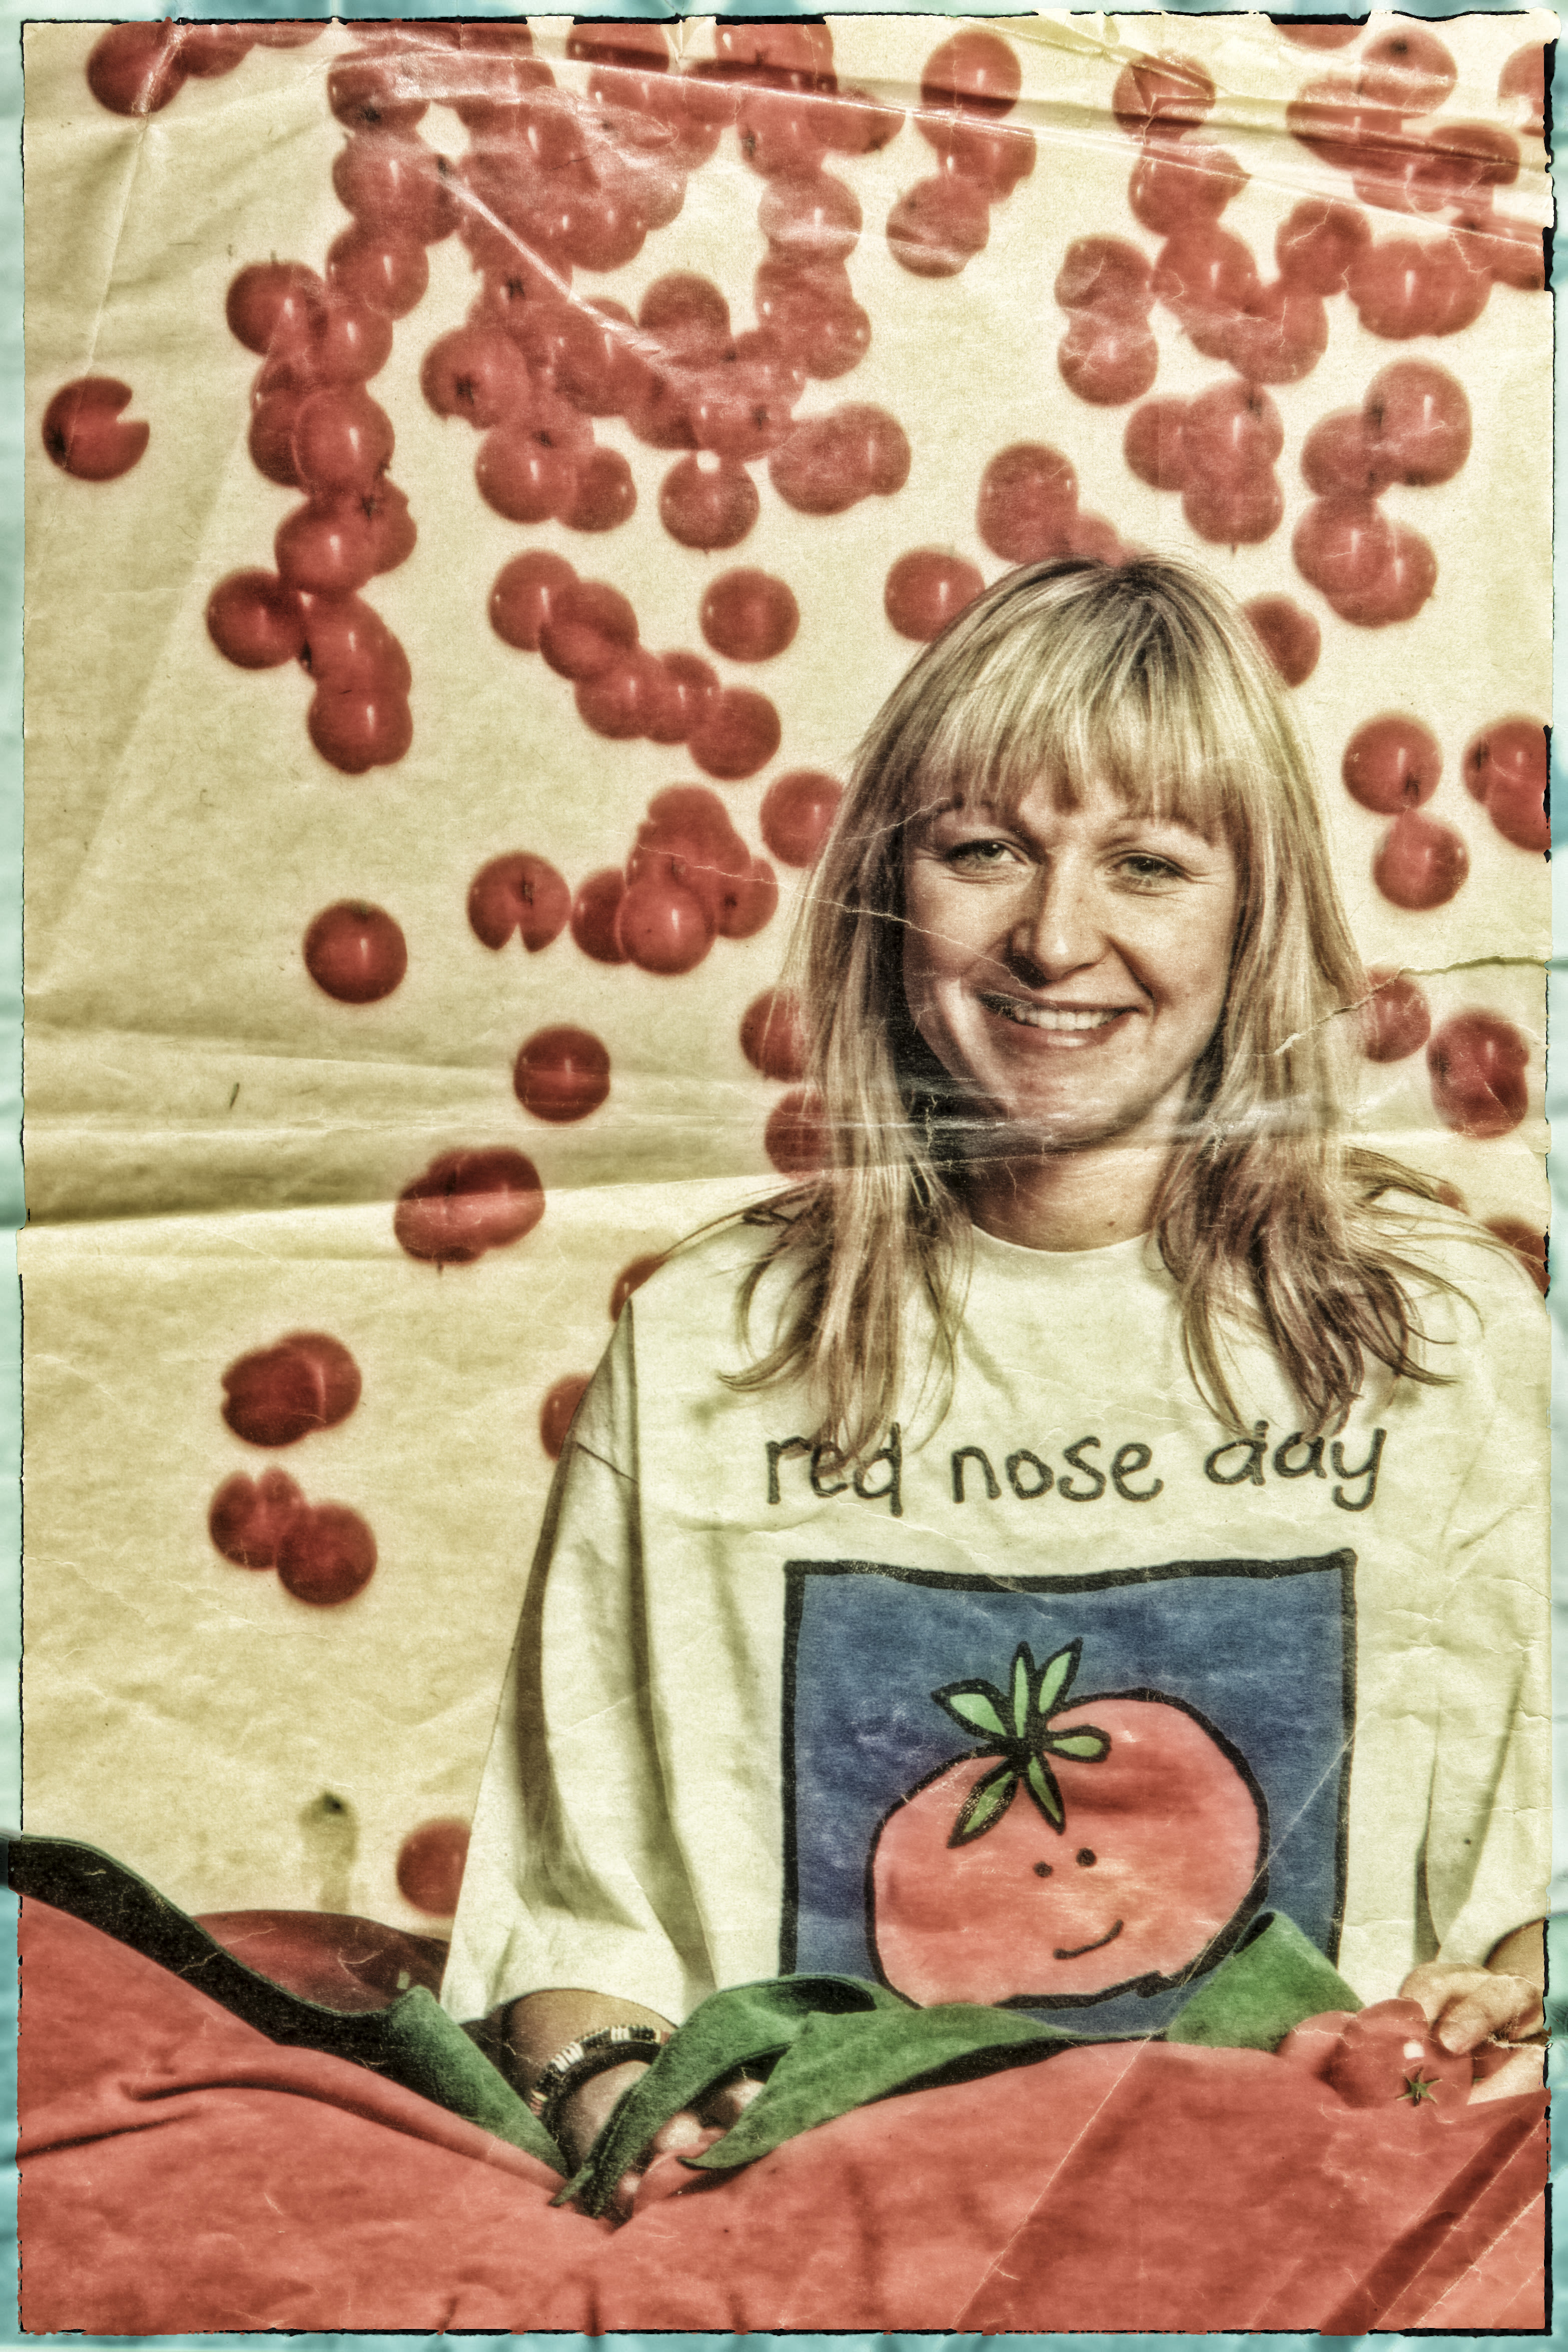 An odl photo of Jane Tewson wearing a Red Nose Day t-shirt